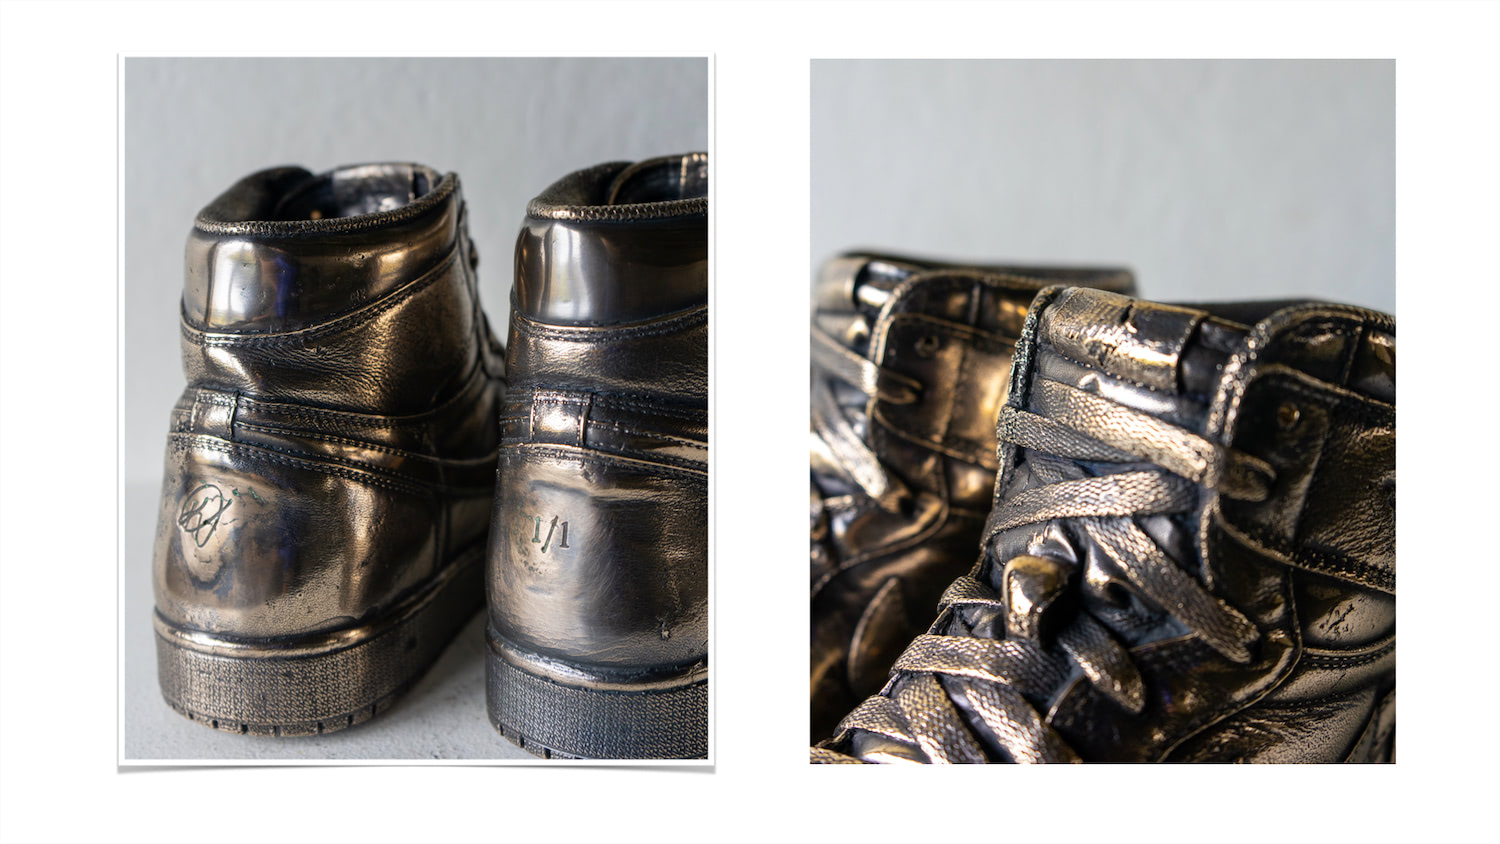 Two photographs show cropped views of the heel and tongue, polished bronze highlights, and a black patina in recessed areas.